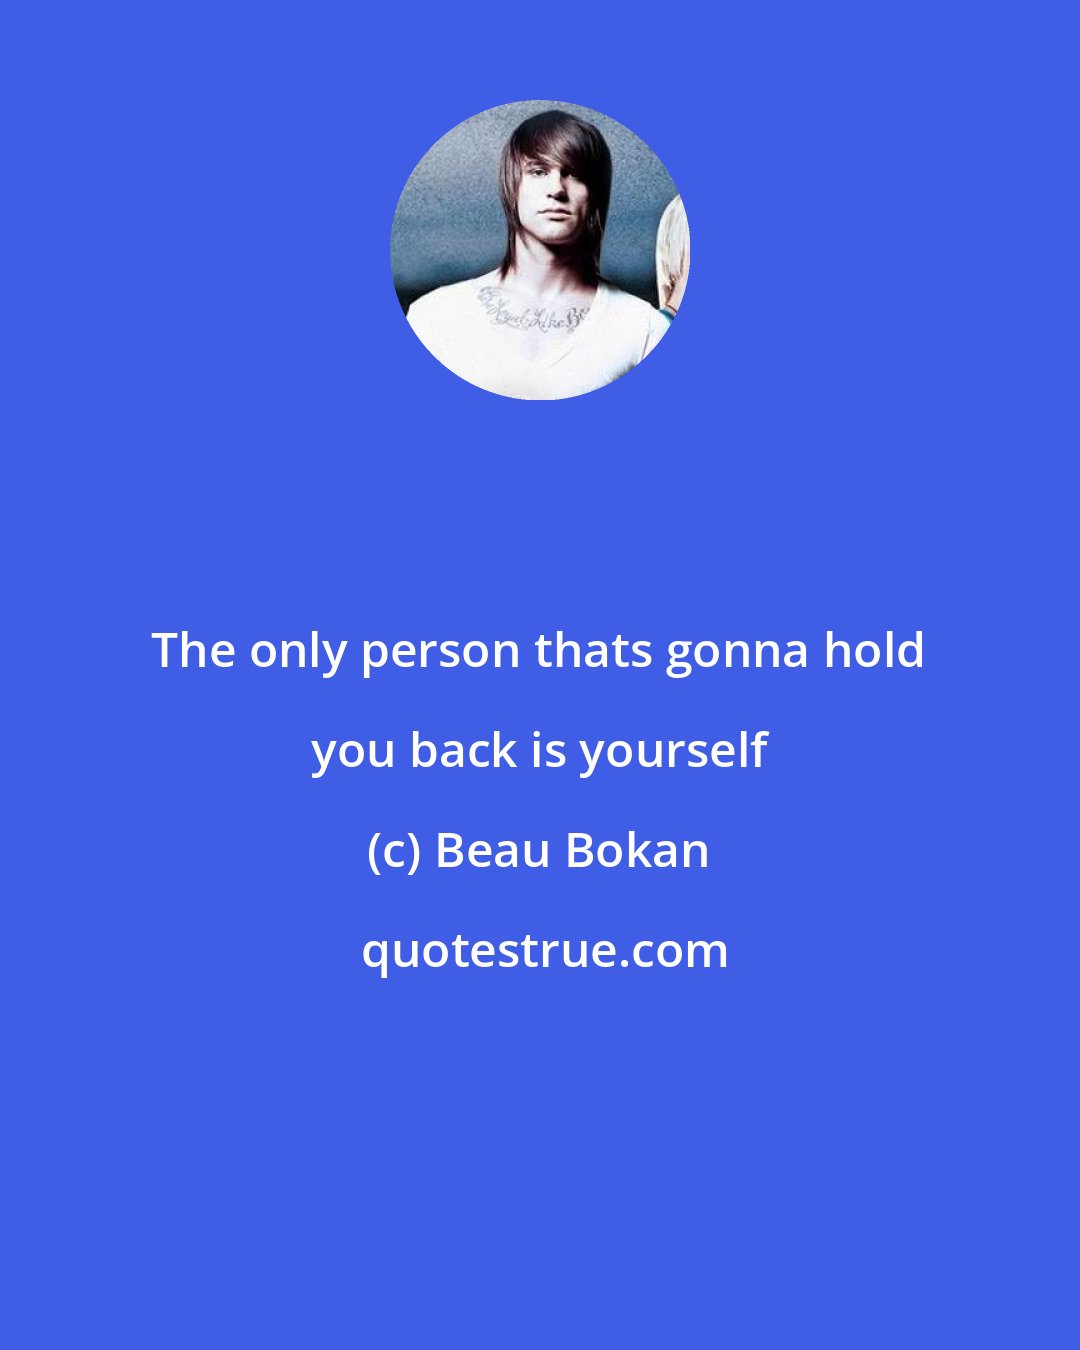 Beau Bokan: The only person thats gonna hold you back is yourself